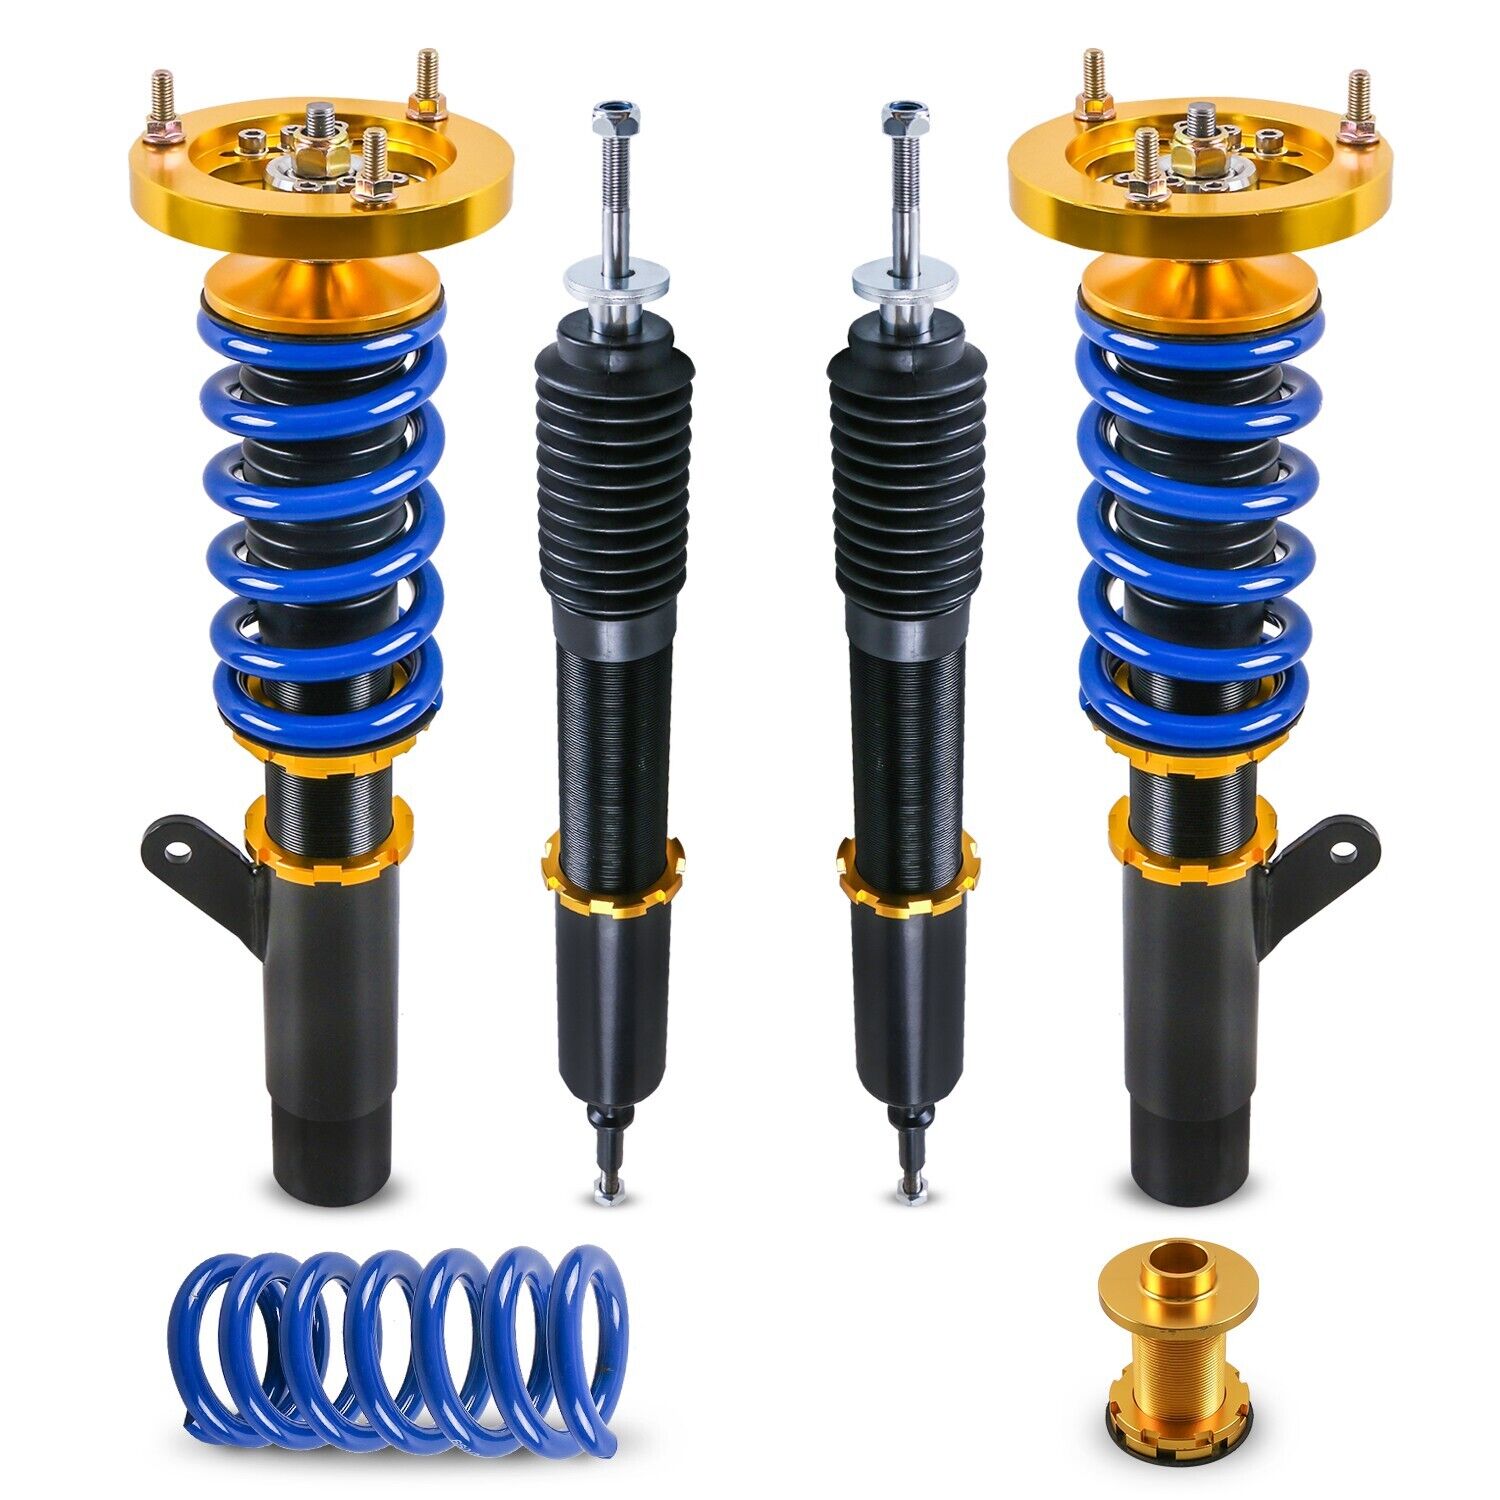 4PCS Coilovers Struts For 2006-2013 BMW 3-Series E90 E92 E93 RWD Models Only